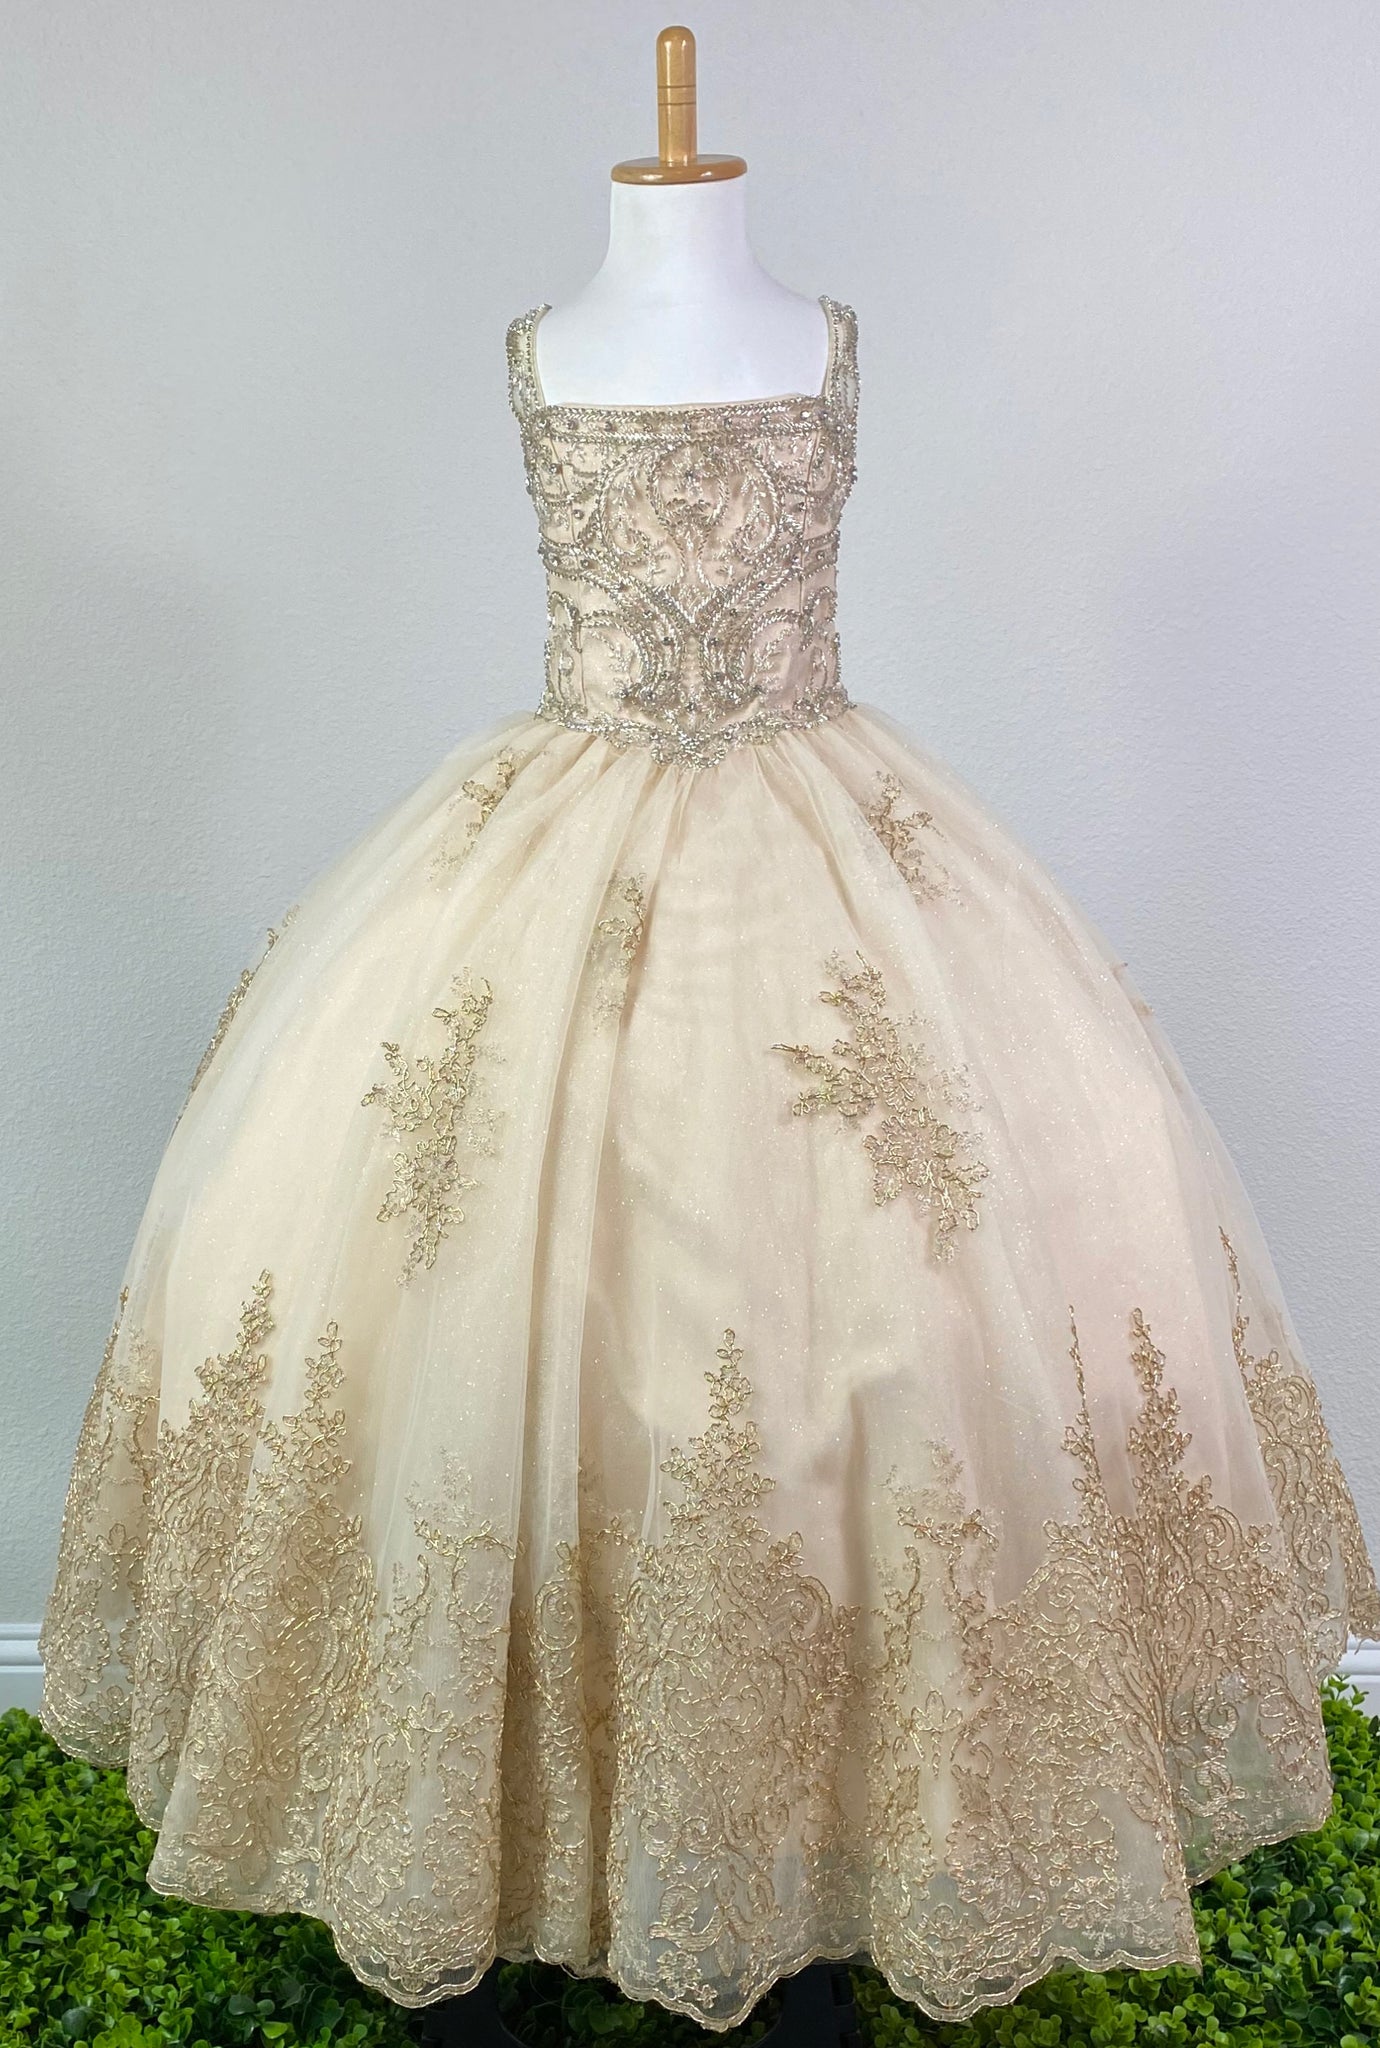 Gold, size 4 Golden bodice Bedazzled rhinestone tulle over bodice and thin straps Sparkled tulle over golden satin skirting Gold embroidered trim along edge of skirting Corset back Dress pictured with a petticoat Petticoat not included  Choose from a tulle, cloth, or wire for best look